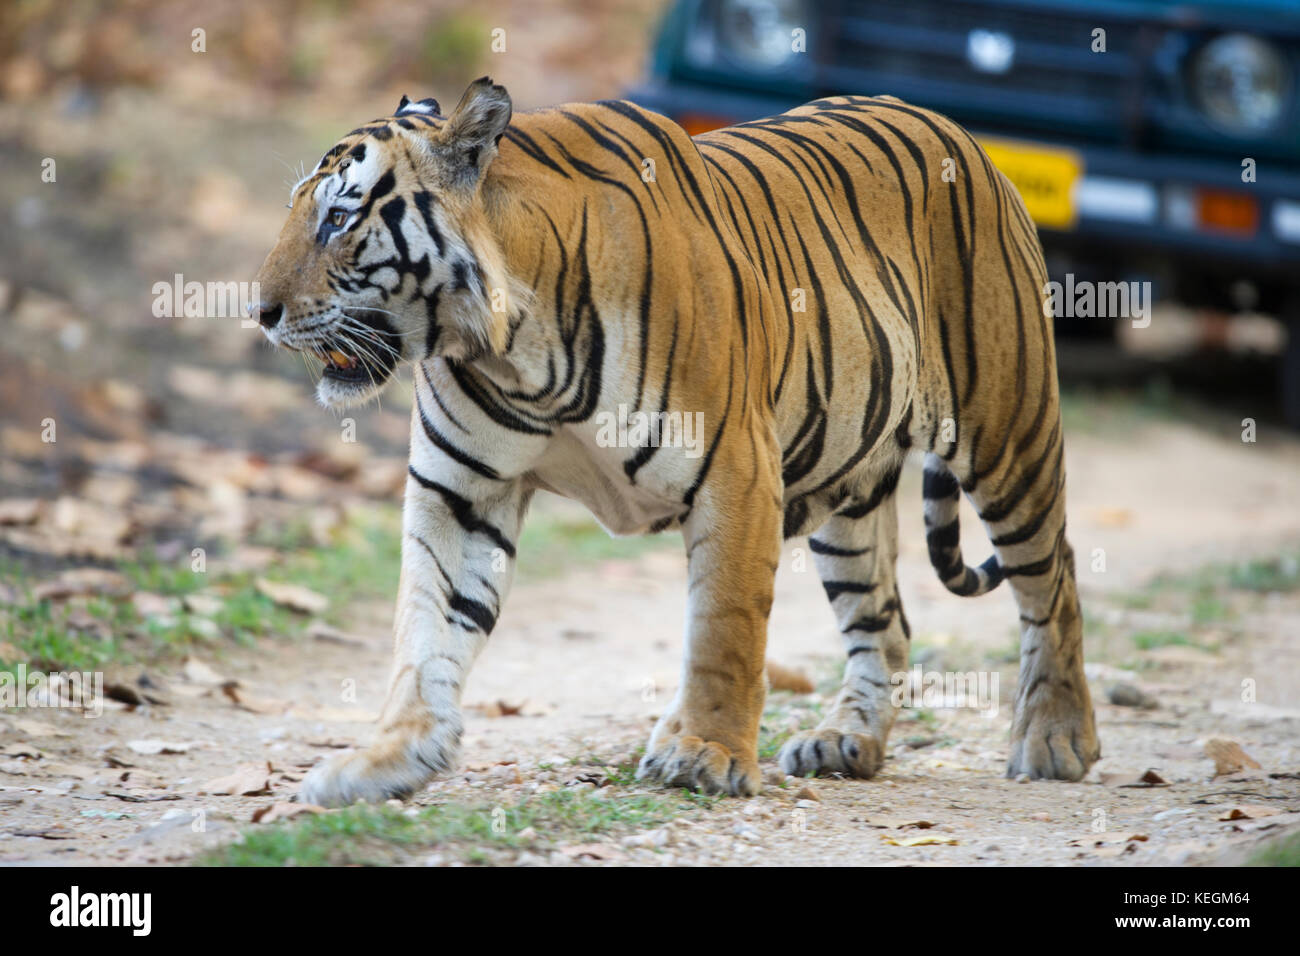 Munna a large male Bengal Tiger with the letters cat on his forehead being followed by a tourist jeep Stock Photo